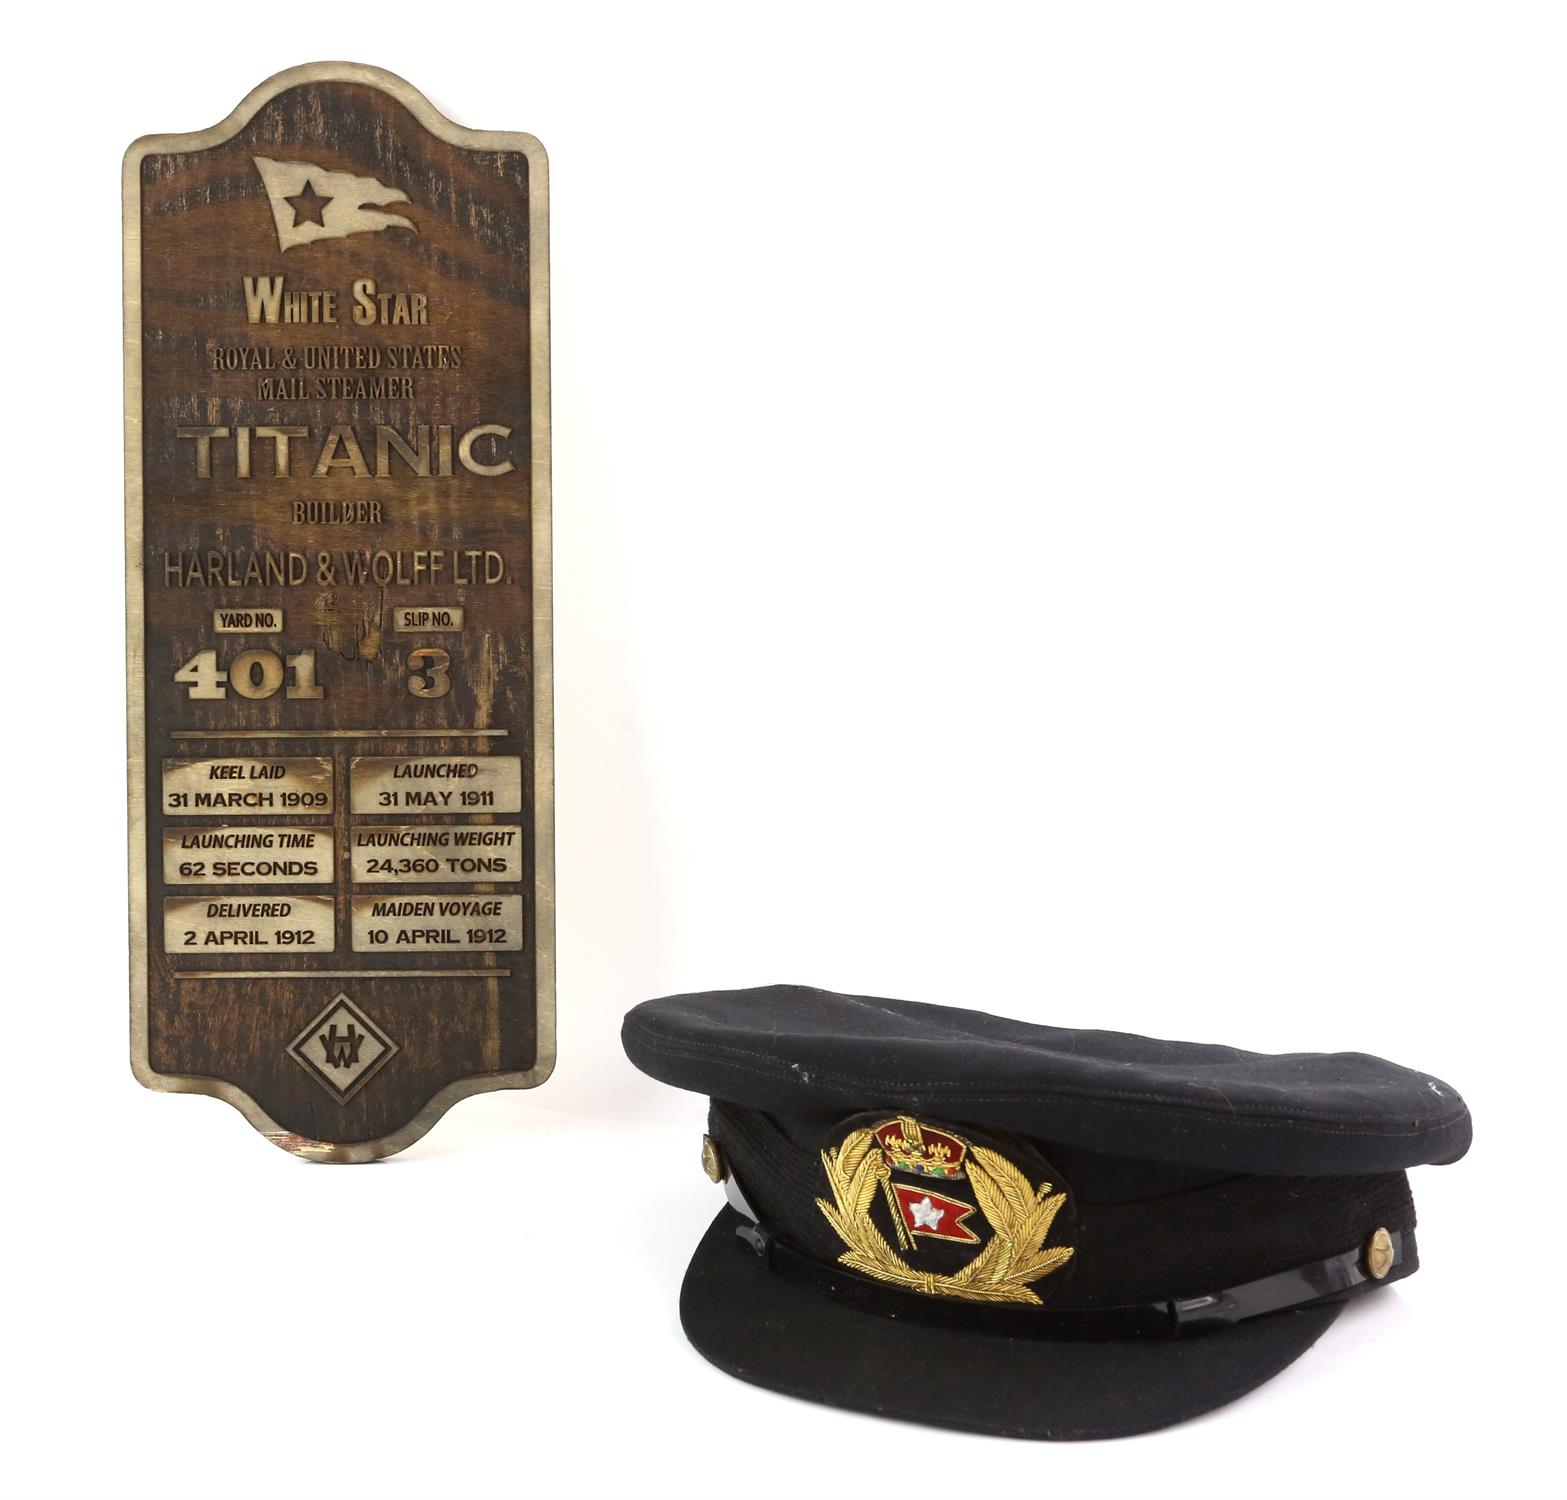 Titanic (1997) an officer's hat and prop wall plaque - White Star Royal & United States Mail